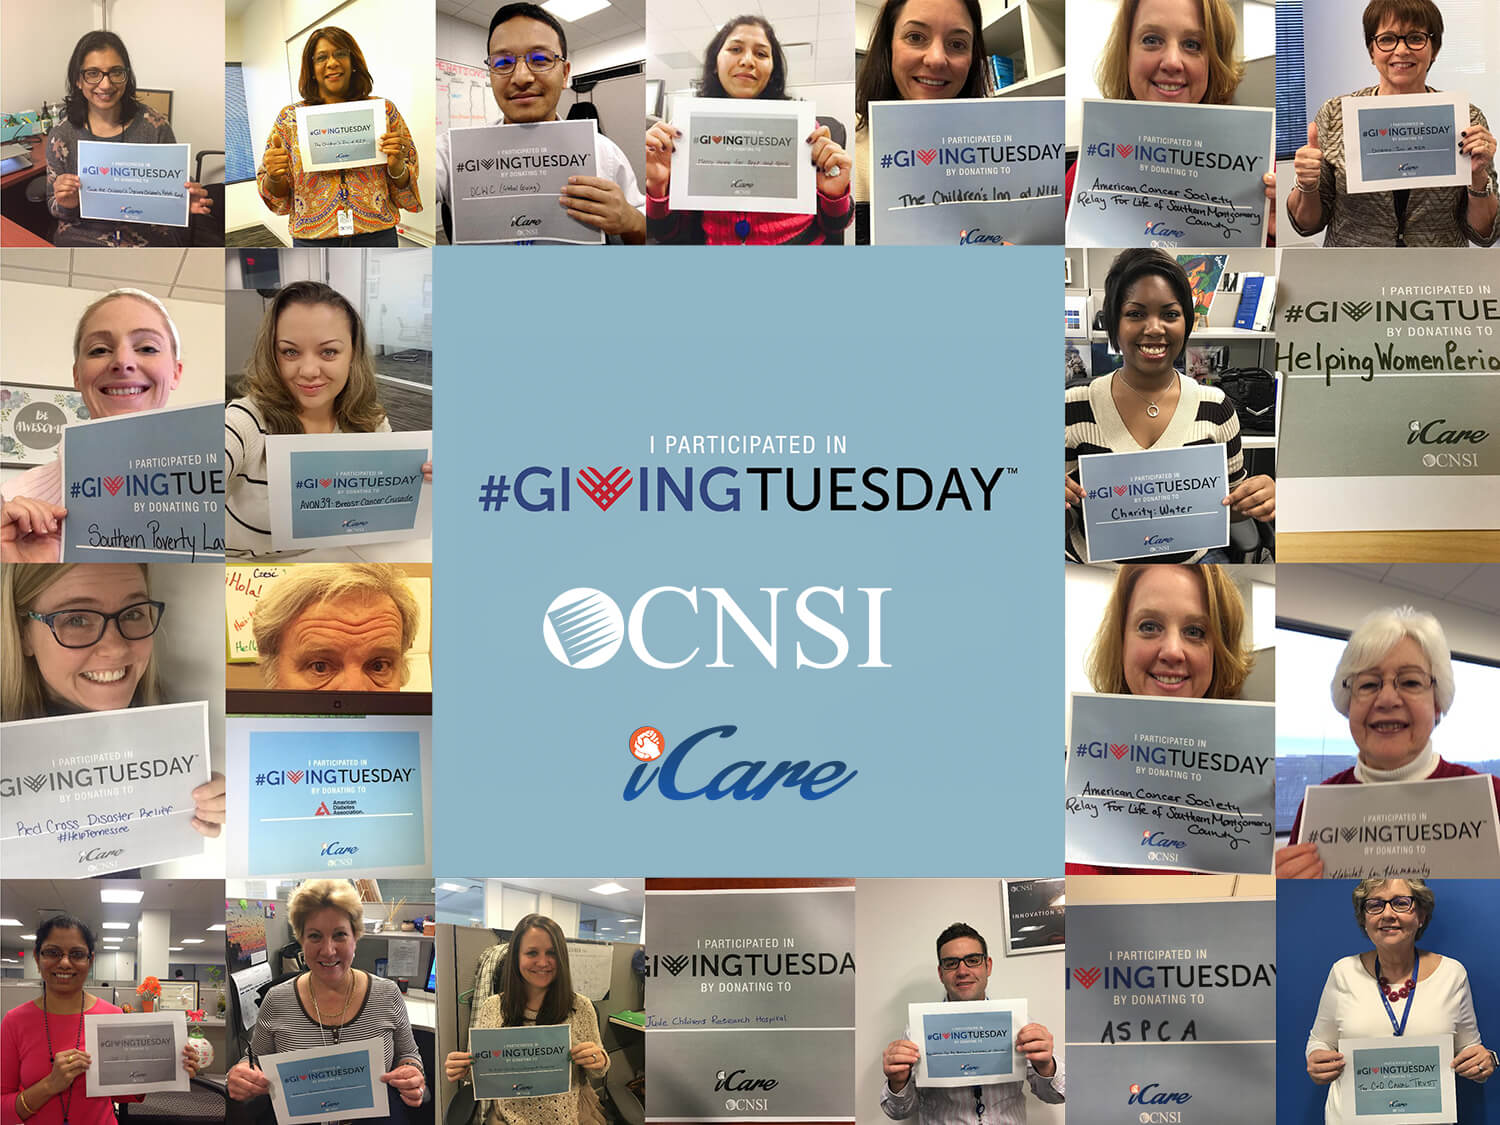 Happiness is #GivingTuesday